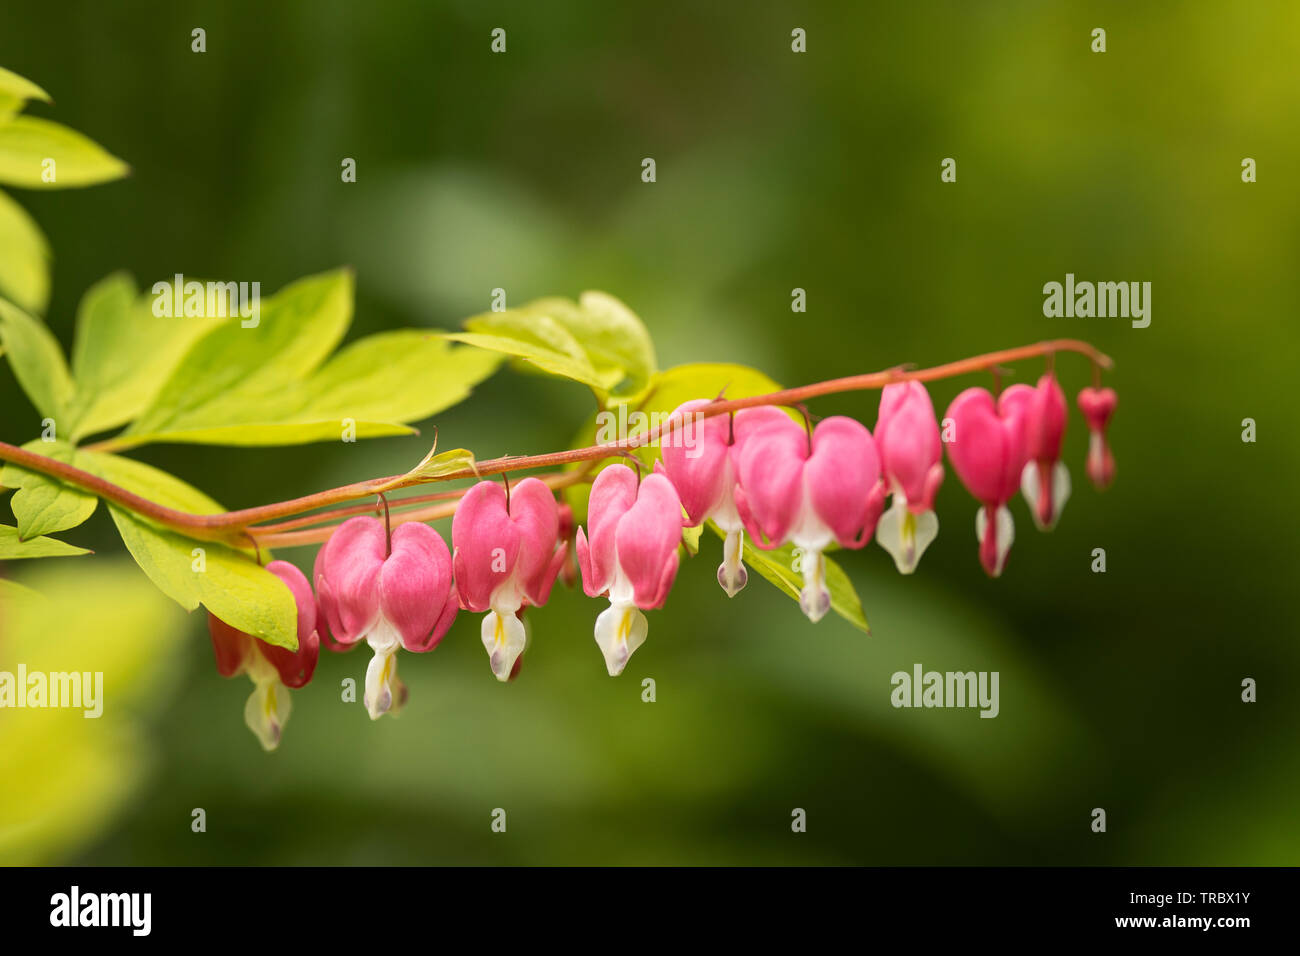 Lamprocapnos spectabilis in the family Papaveraceae, known as Asian bleeding heart, blooming in the spring in Boston, Massachusetts, USA. Stock Photo